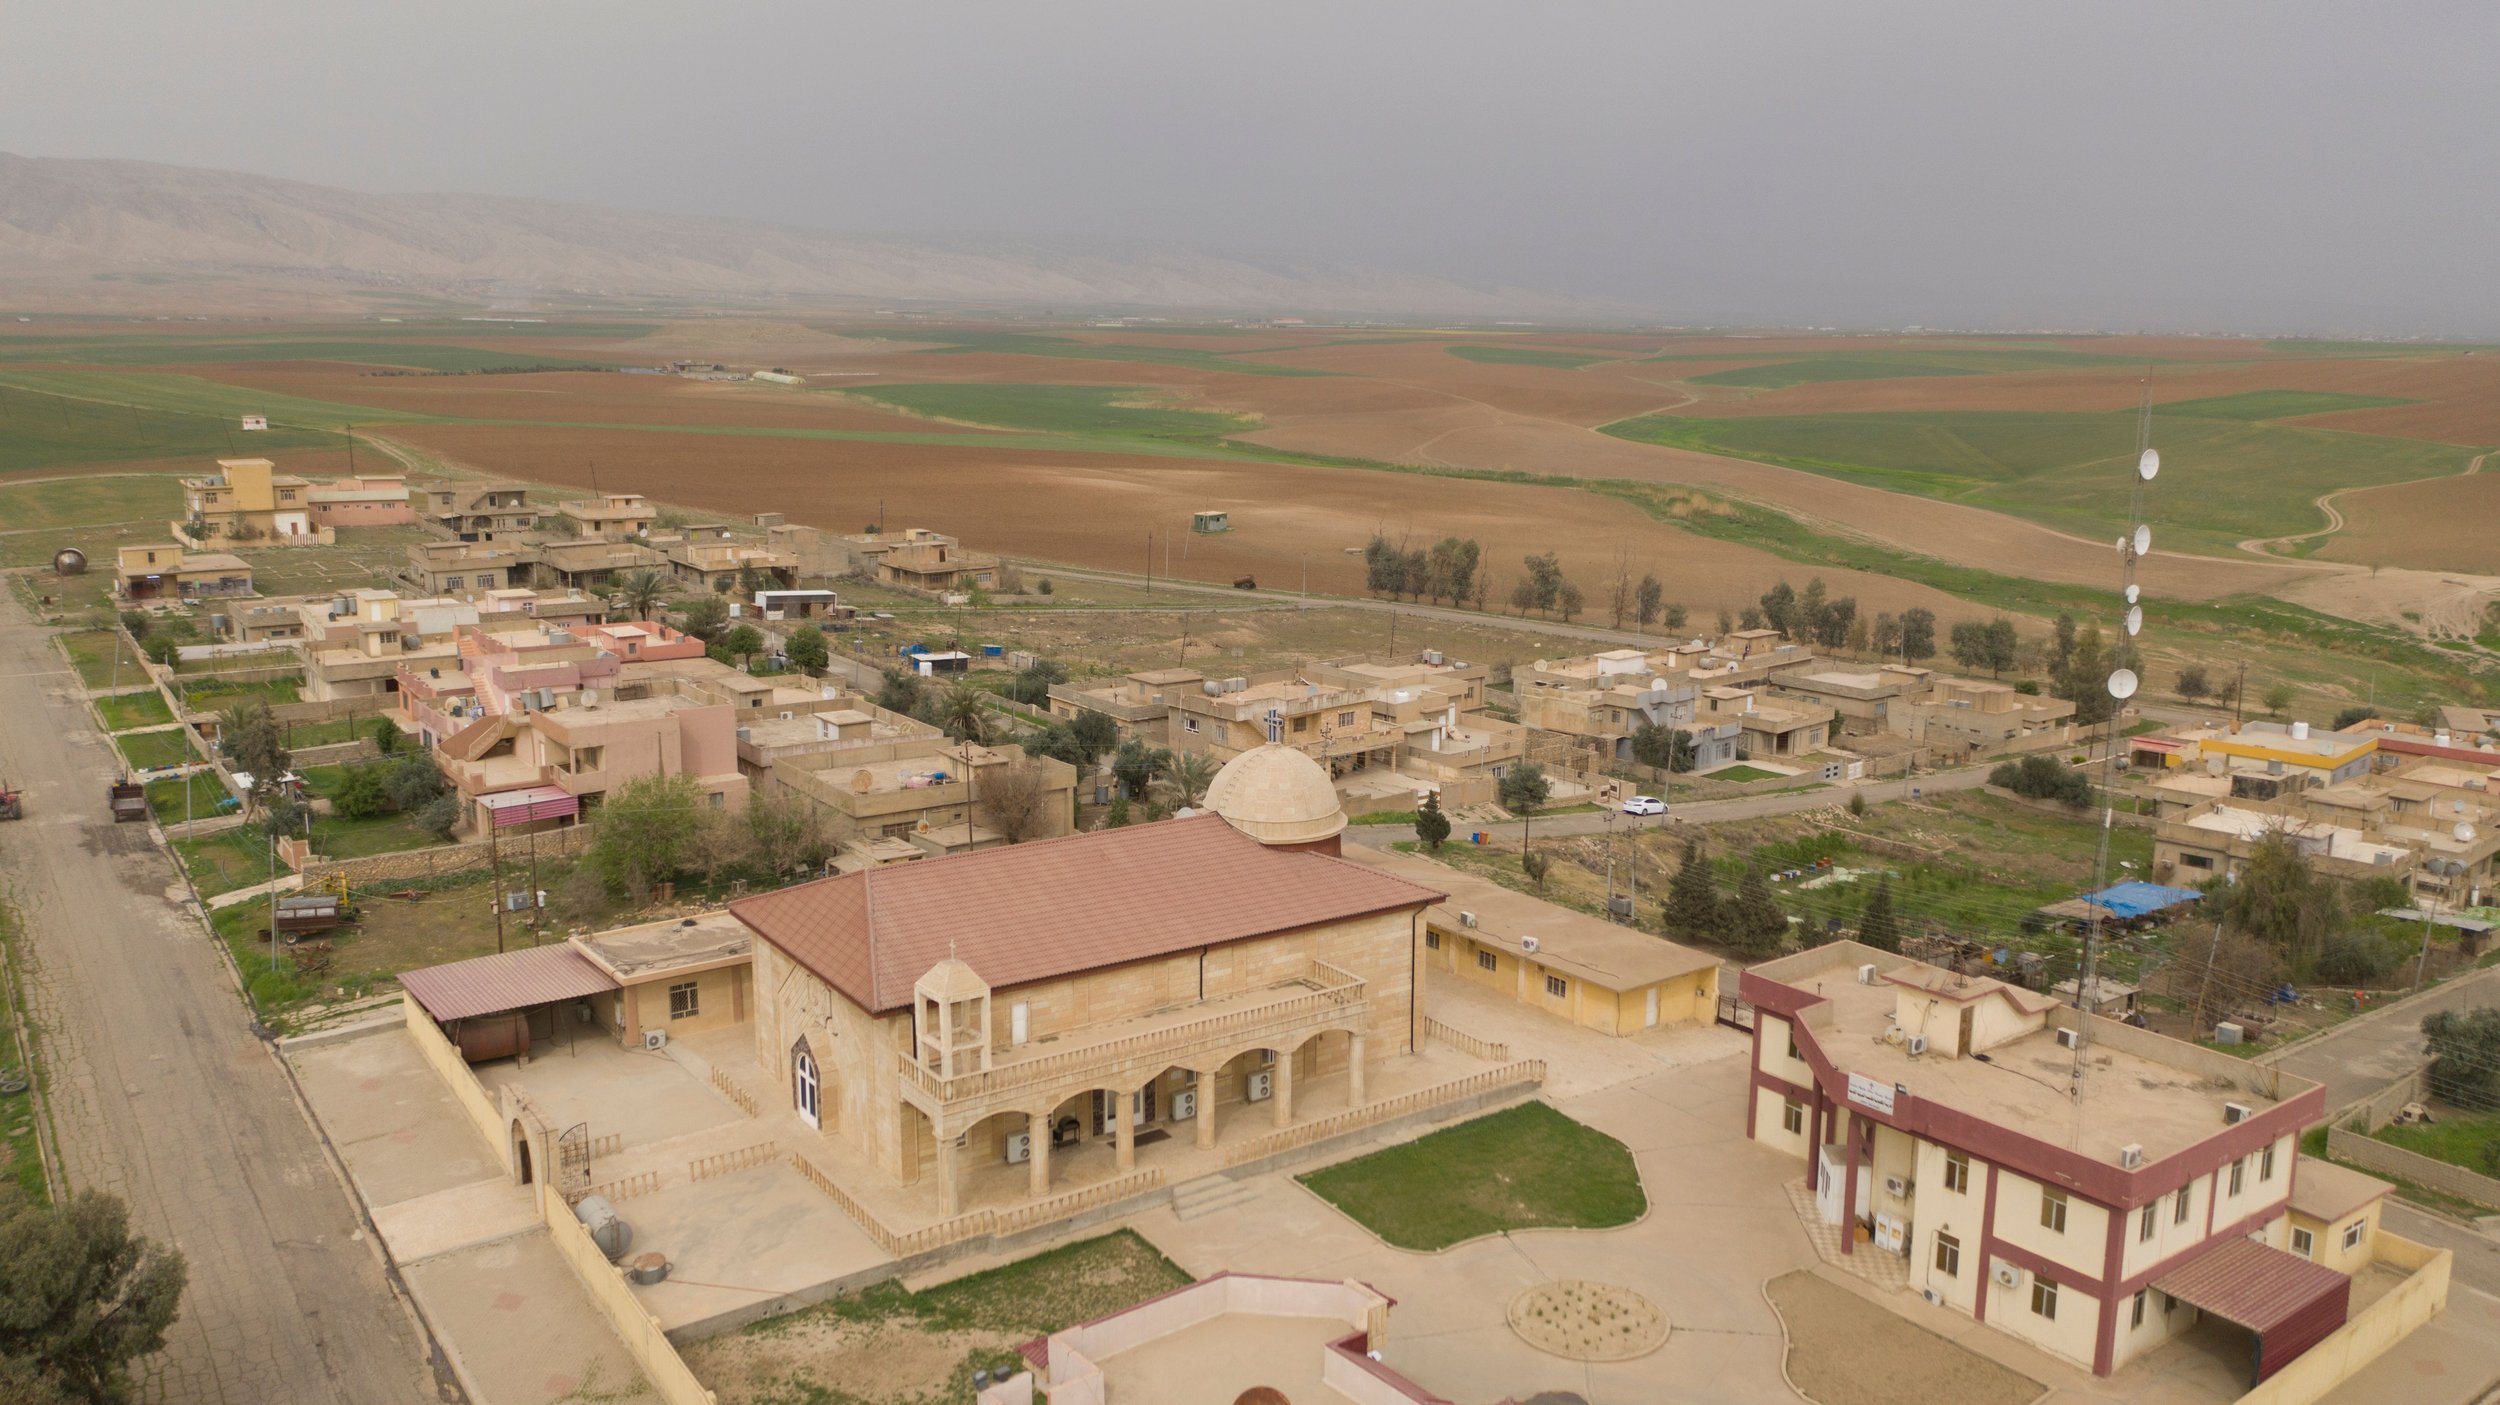  Tesqopa, sometimes called Tel Skuf, is an ancient village located in the Nineveh Plain of northern Iraq. Targeted first by Mongols and then by ISIS, Tesqopa has remained a village of the Assyrians who proclaim the Christian faith. The original Mar Y